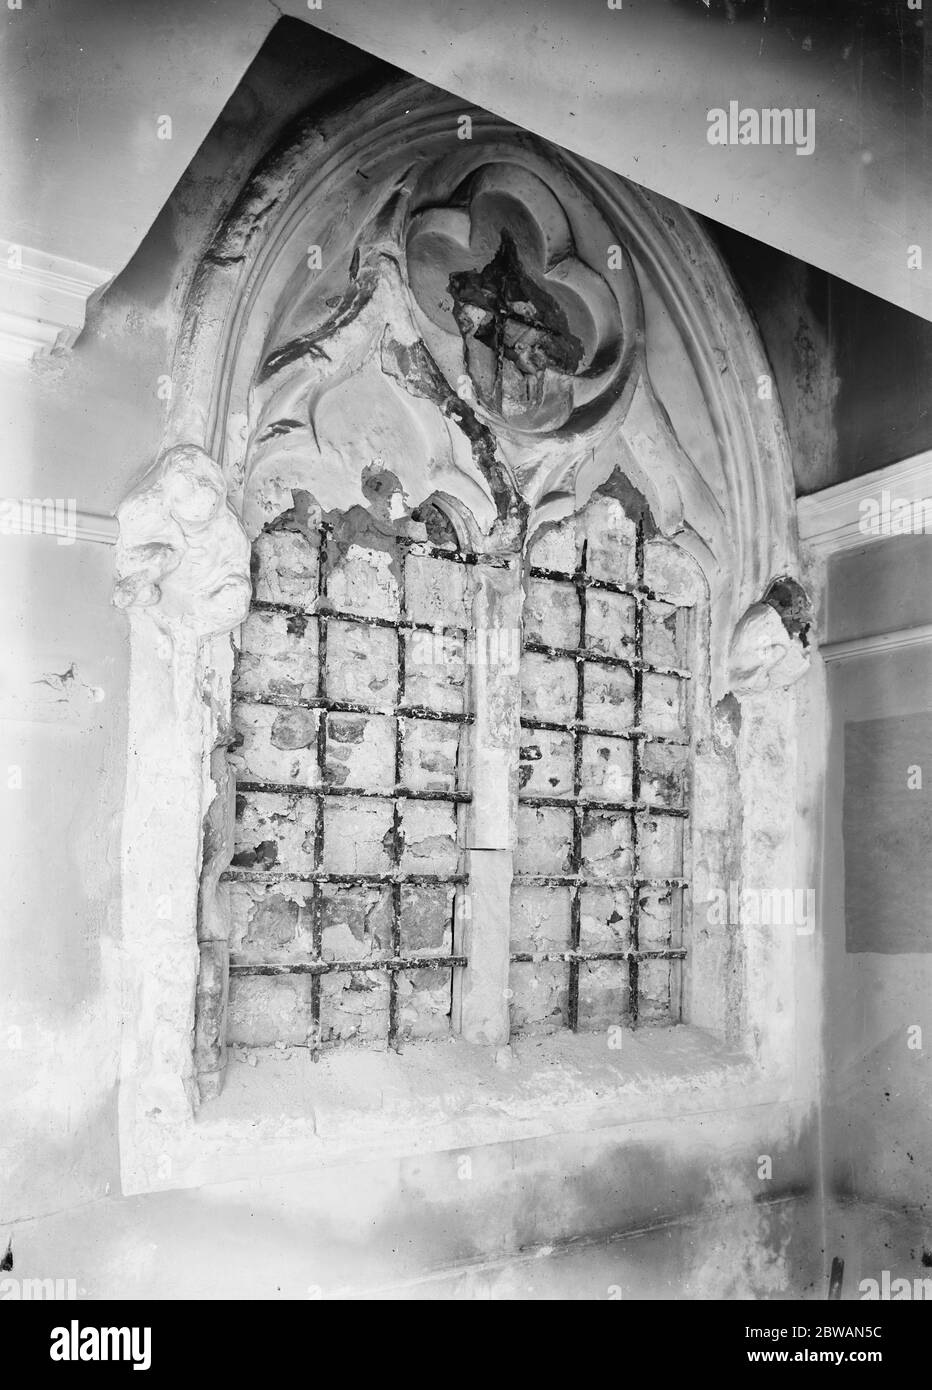 Remarkable find of old stained glass at Chelsea Old Church An old window at Chelsea Old Church that has been blocked for nearly 300 years has been opened . Hidden behind the plaster the remains of an early 14th century stained glass window . This discovery is regarded by antiquaries as one of the very highest importance . The picture shows the old window after it had been opened and the stained glass removed Stock Photo